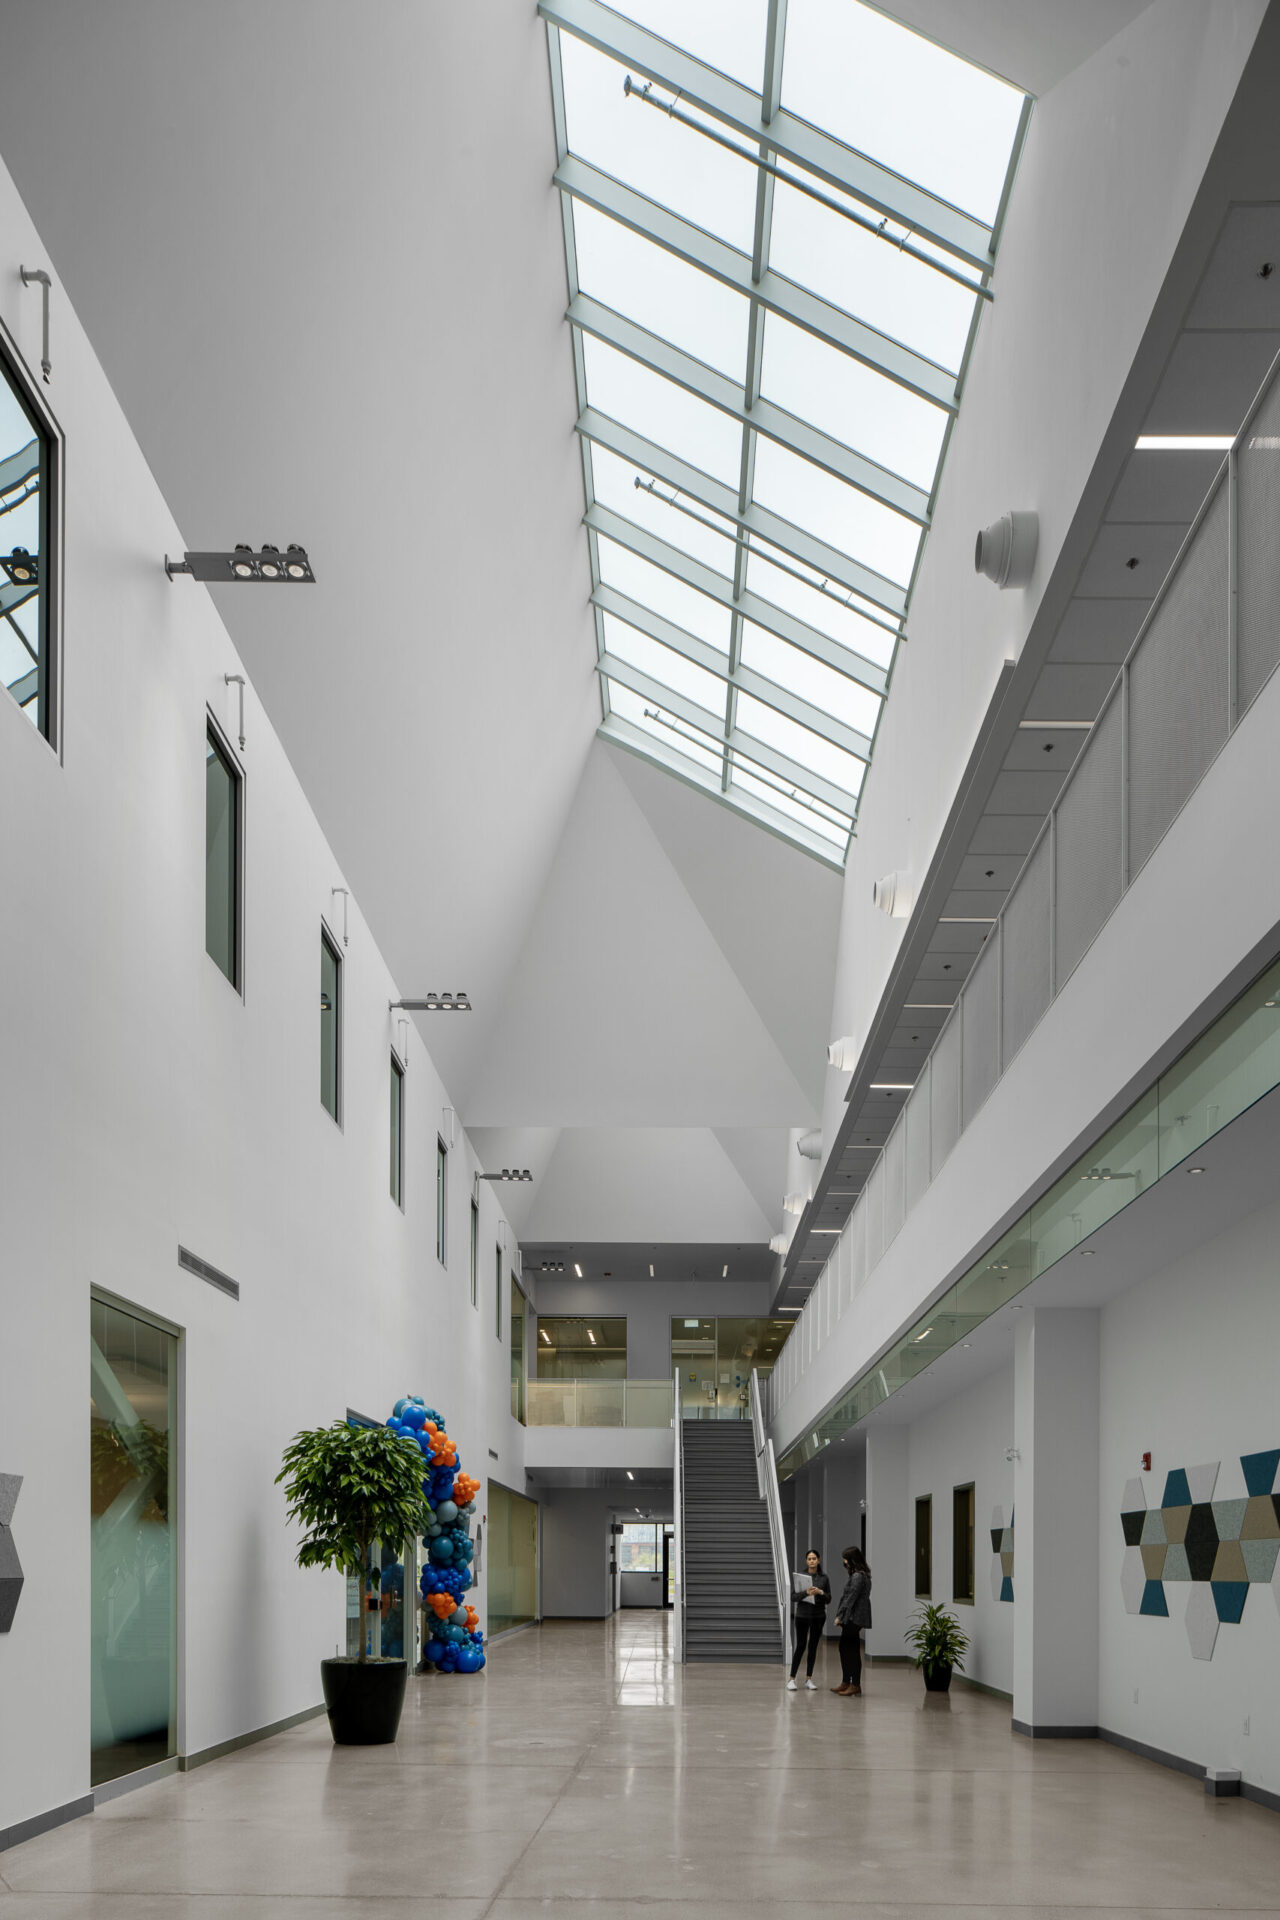 The architecture of an office building lobby with a skylight.